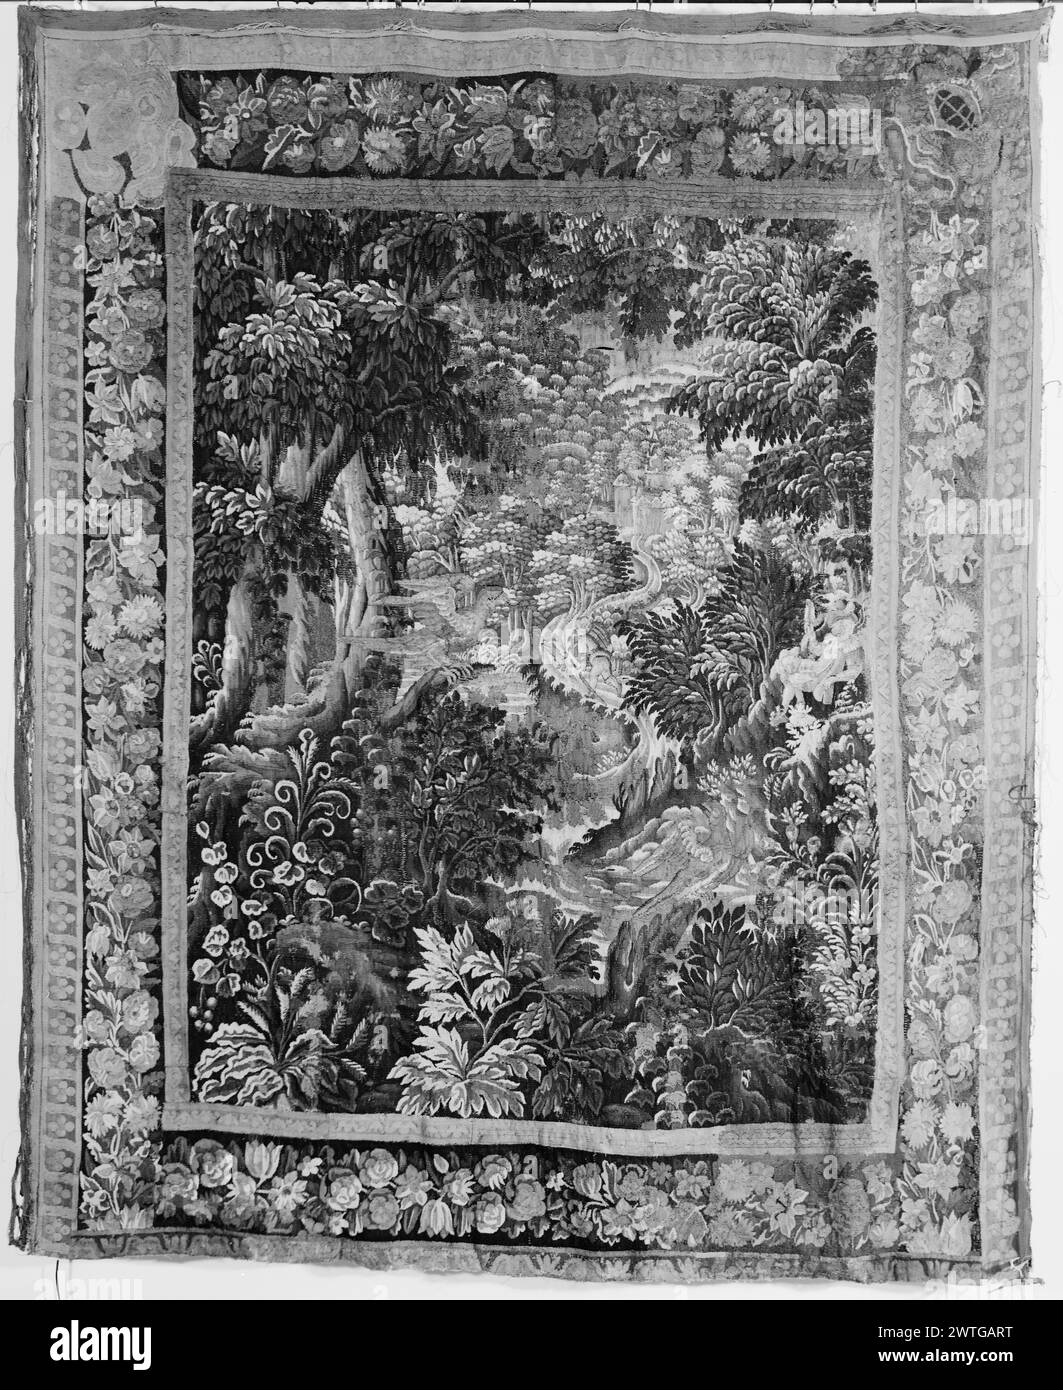 Landscape with hunter, dog and gentleman. unknown c. 1680-1700 Tapestry Dimensions: H 8'6' x W 7' Tapestry Materials/Techniques: unknown Culture: Flemish Weaving Center: unknown Ownership History: French & Co. purchased from Mrs. Howard Remig, received 5/13/1965; sold to Mrs. Klaus Reichenheim 9/23/1946. Stock Photo